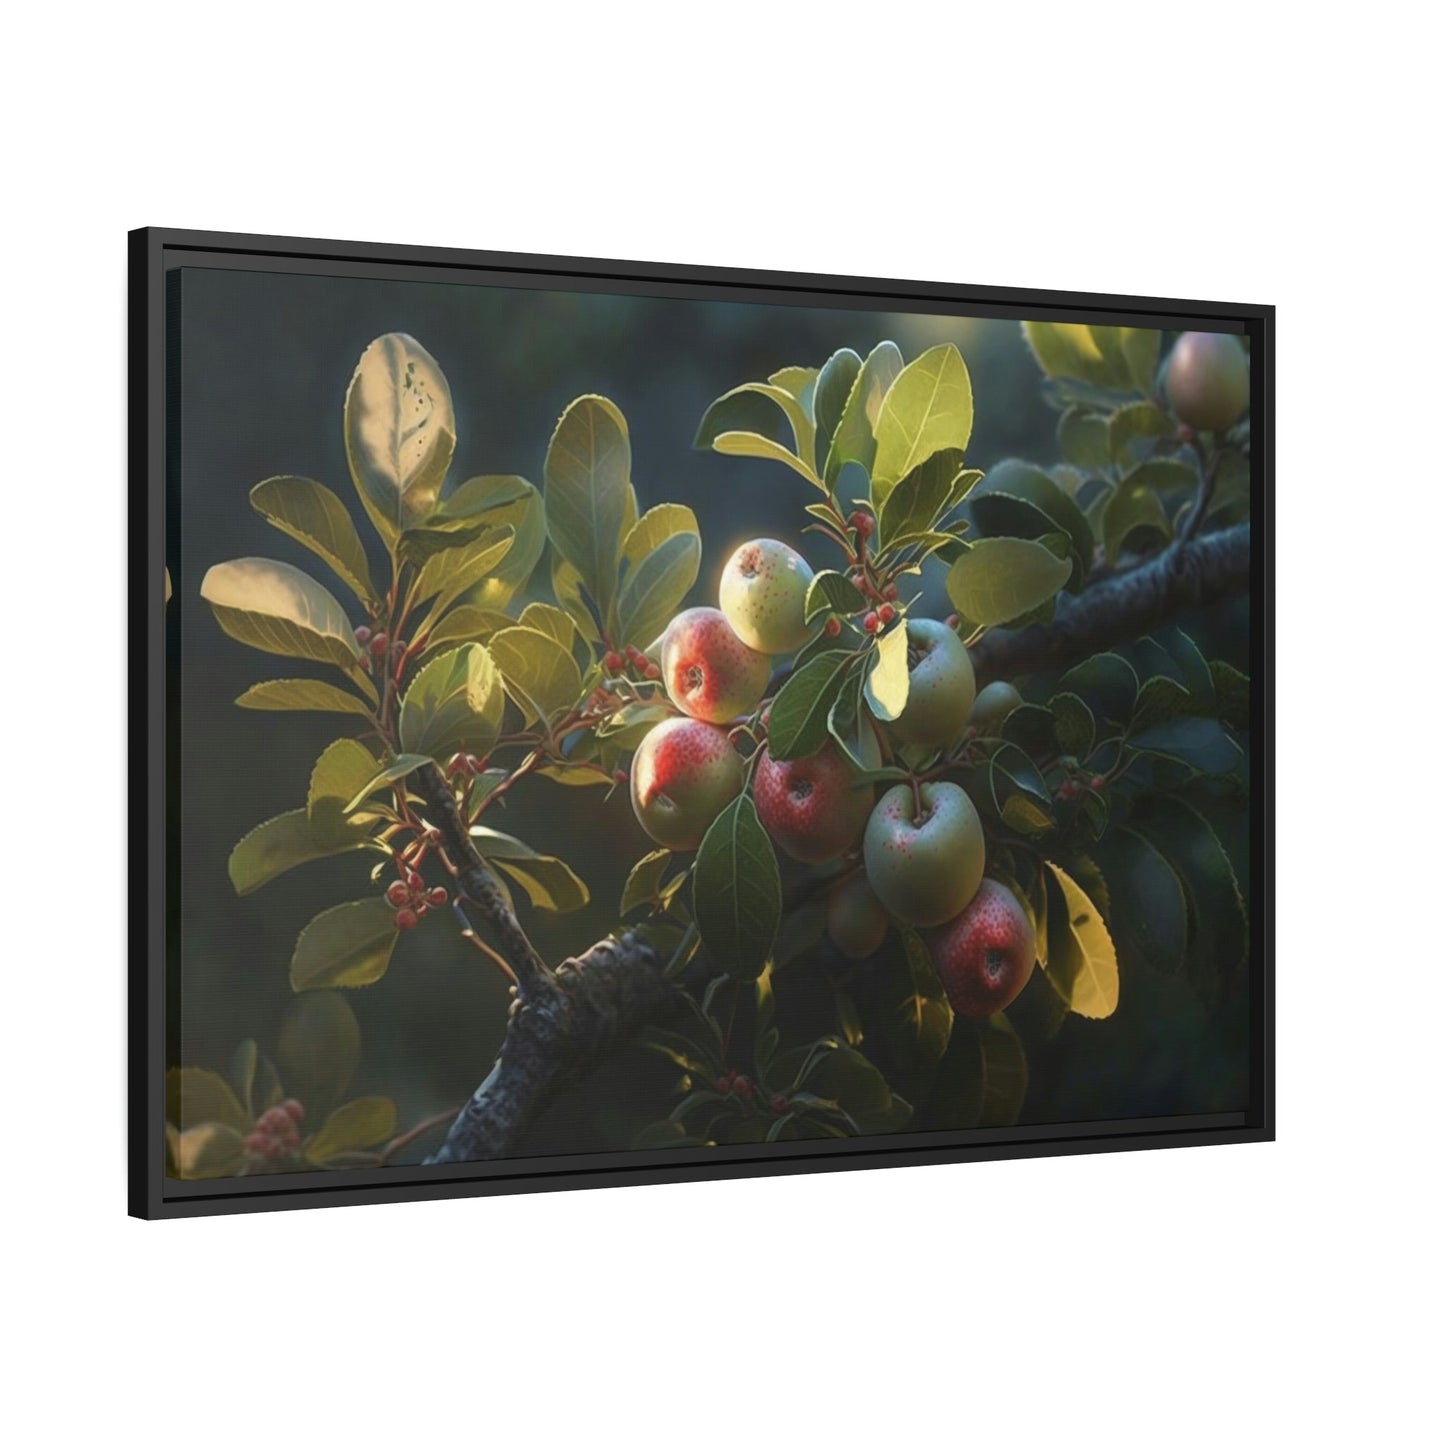 Apple Tree Blossoms: Framed Canvas & Poster Print of Springtime Flowers